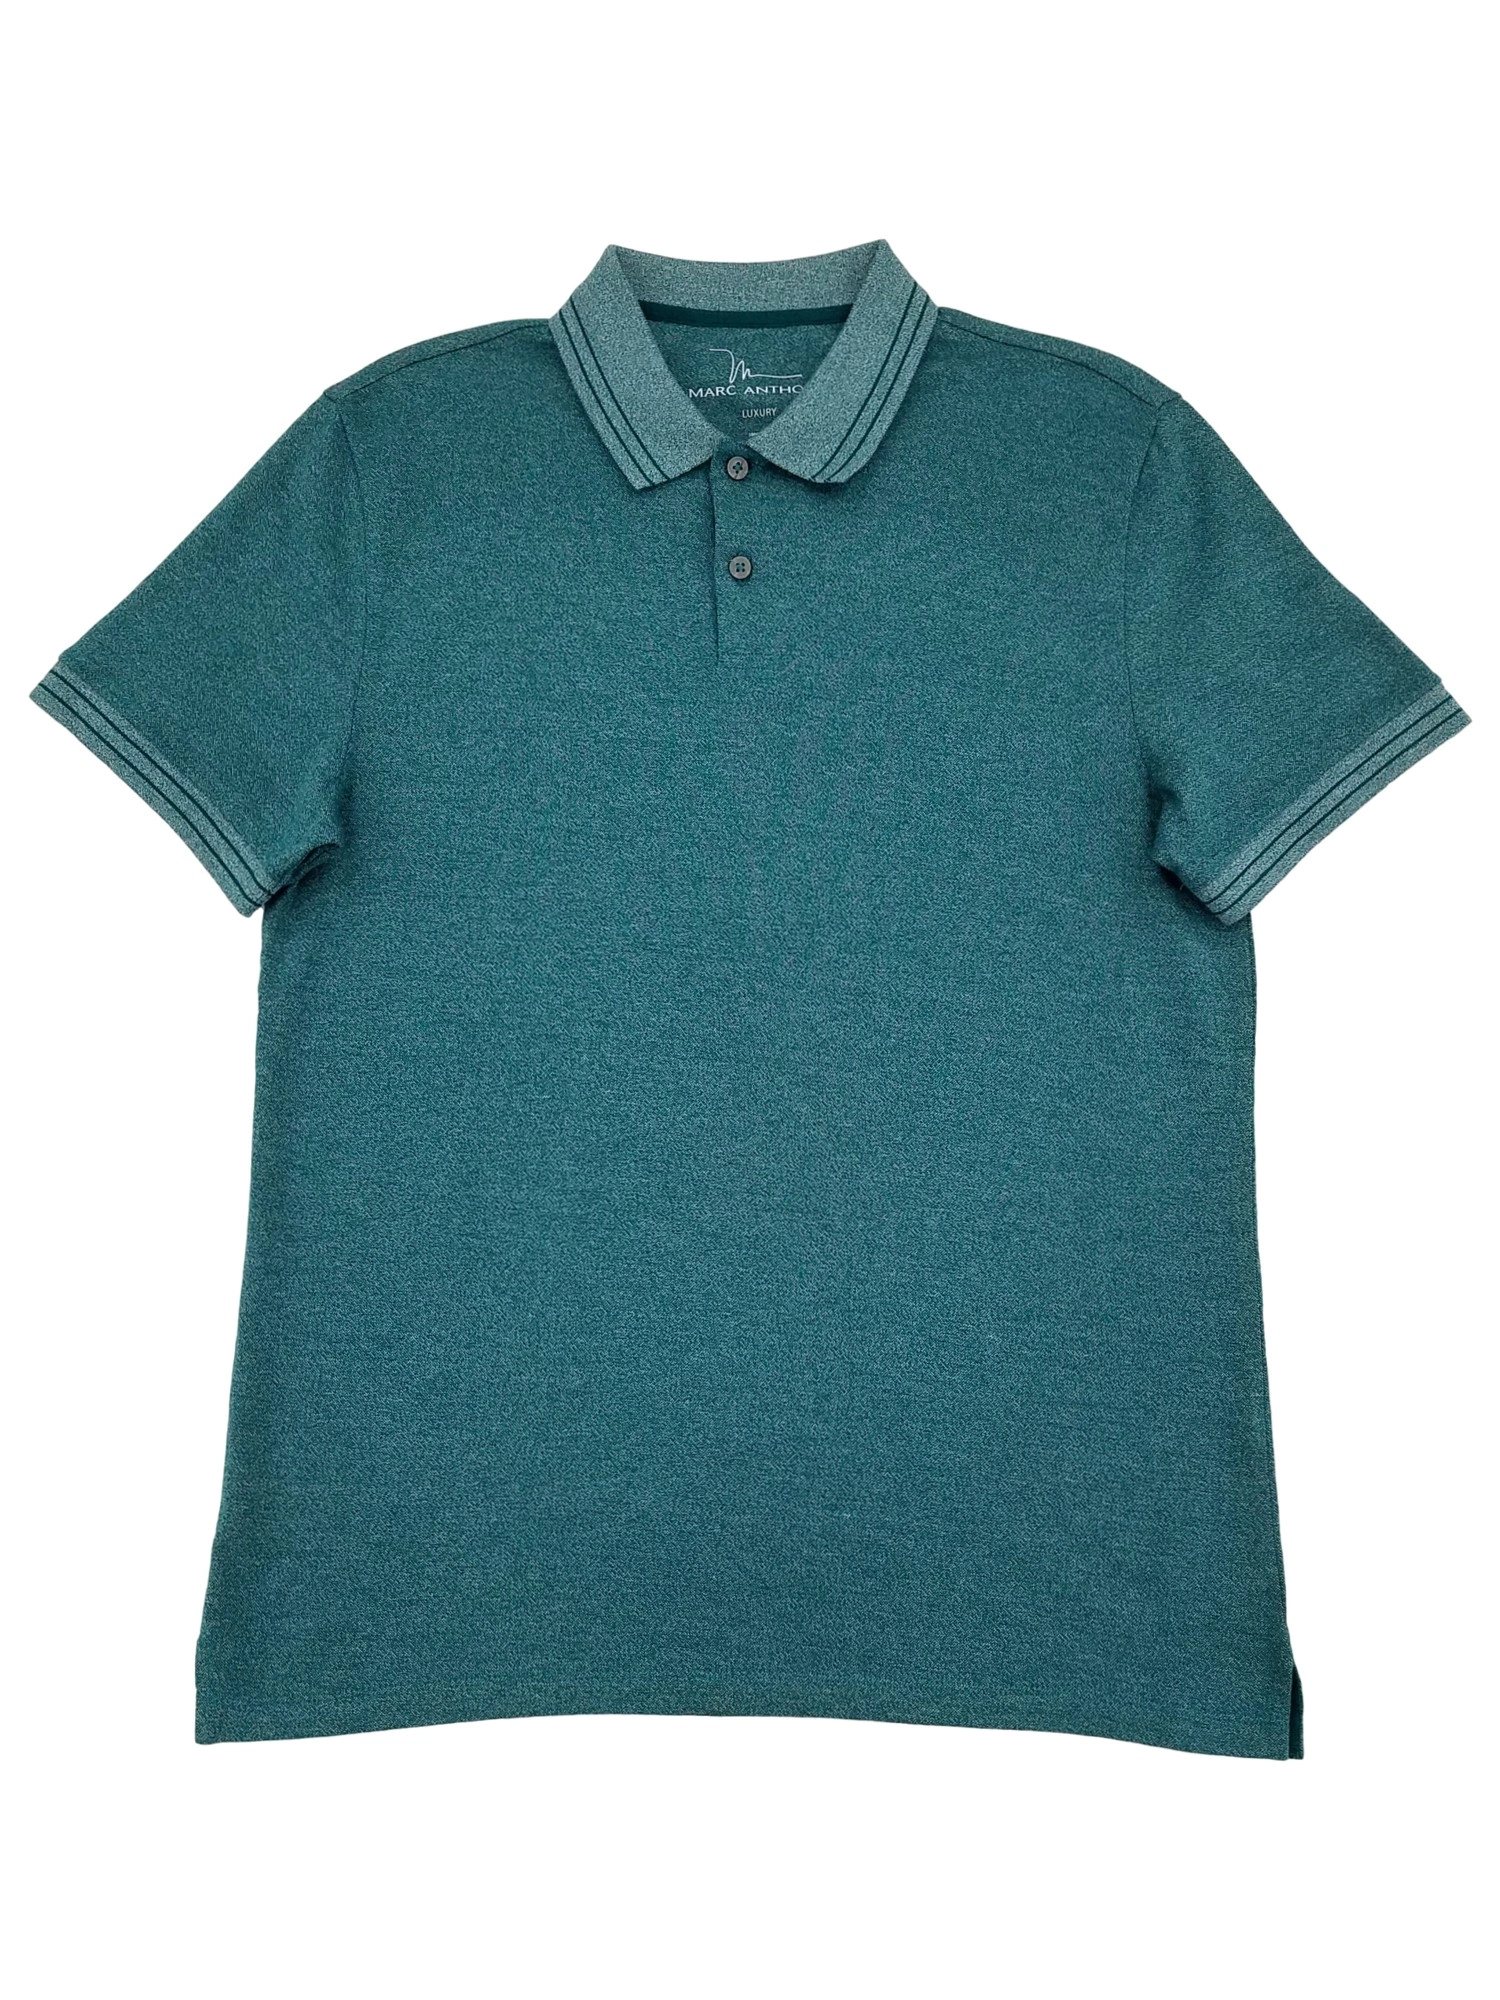 Mens Teal Regular Fit Short Sleeve Double Tipped Polo Shirt